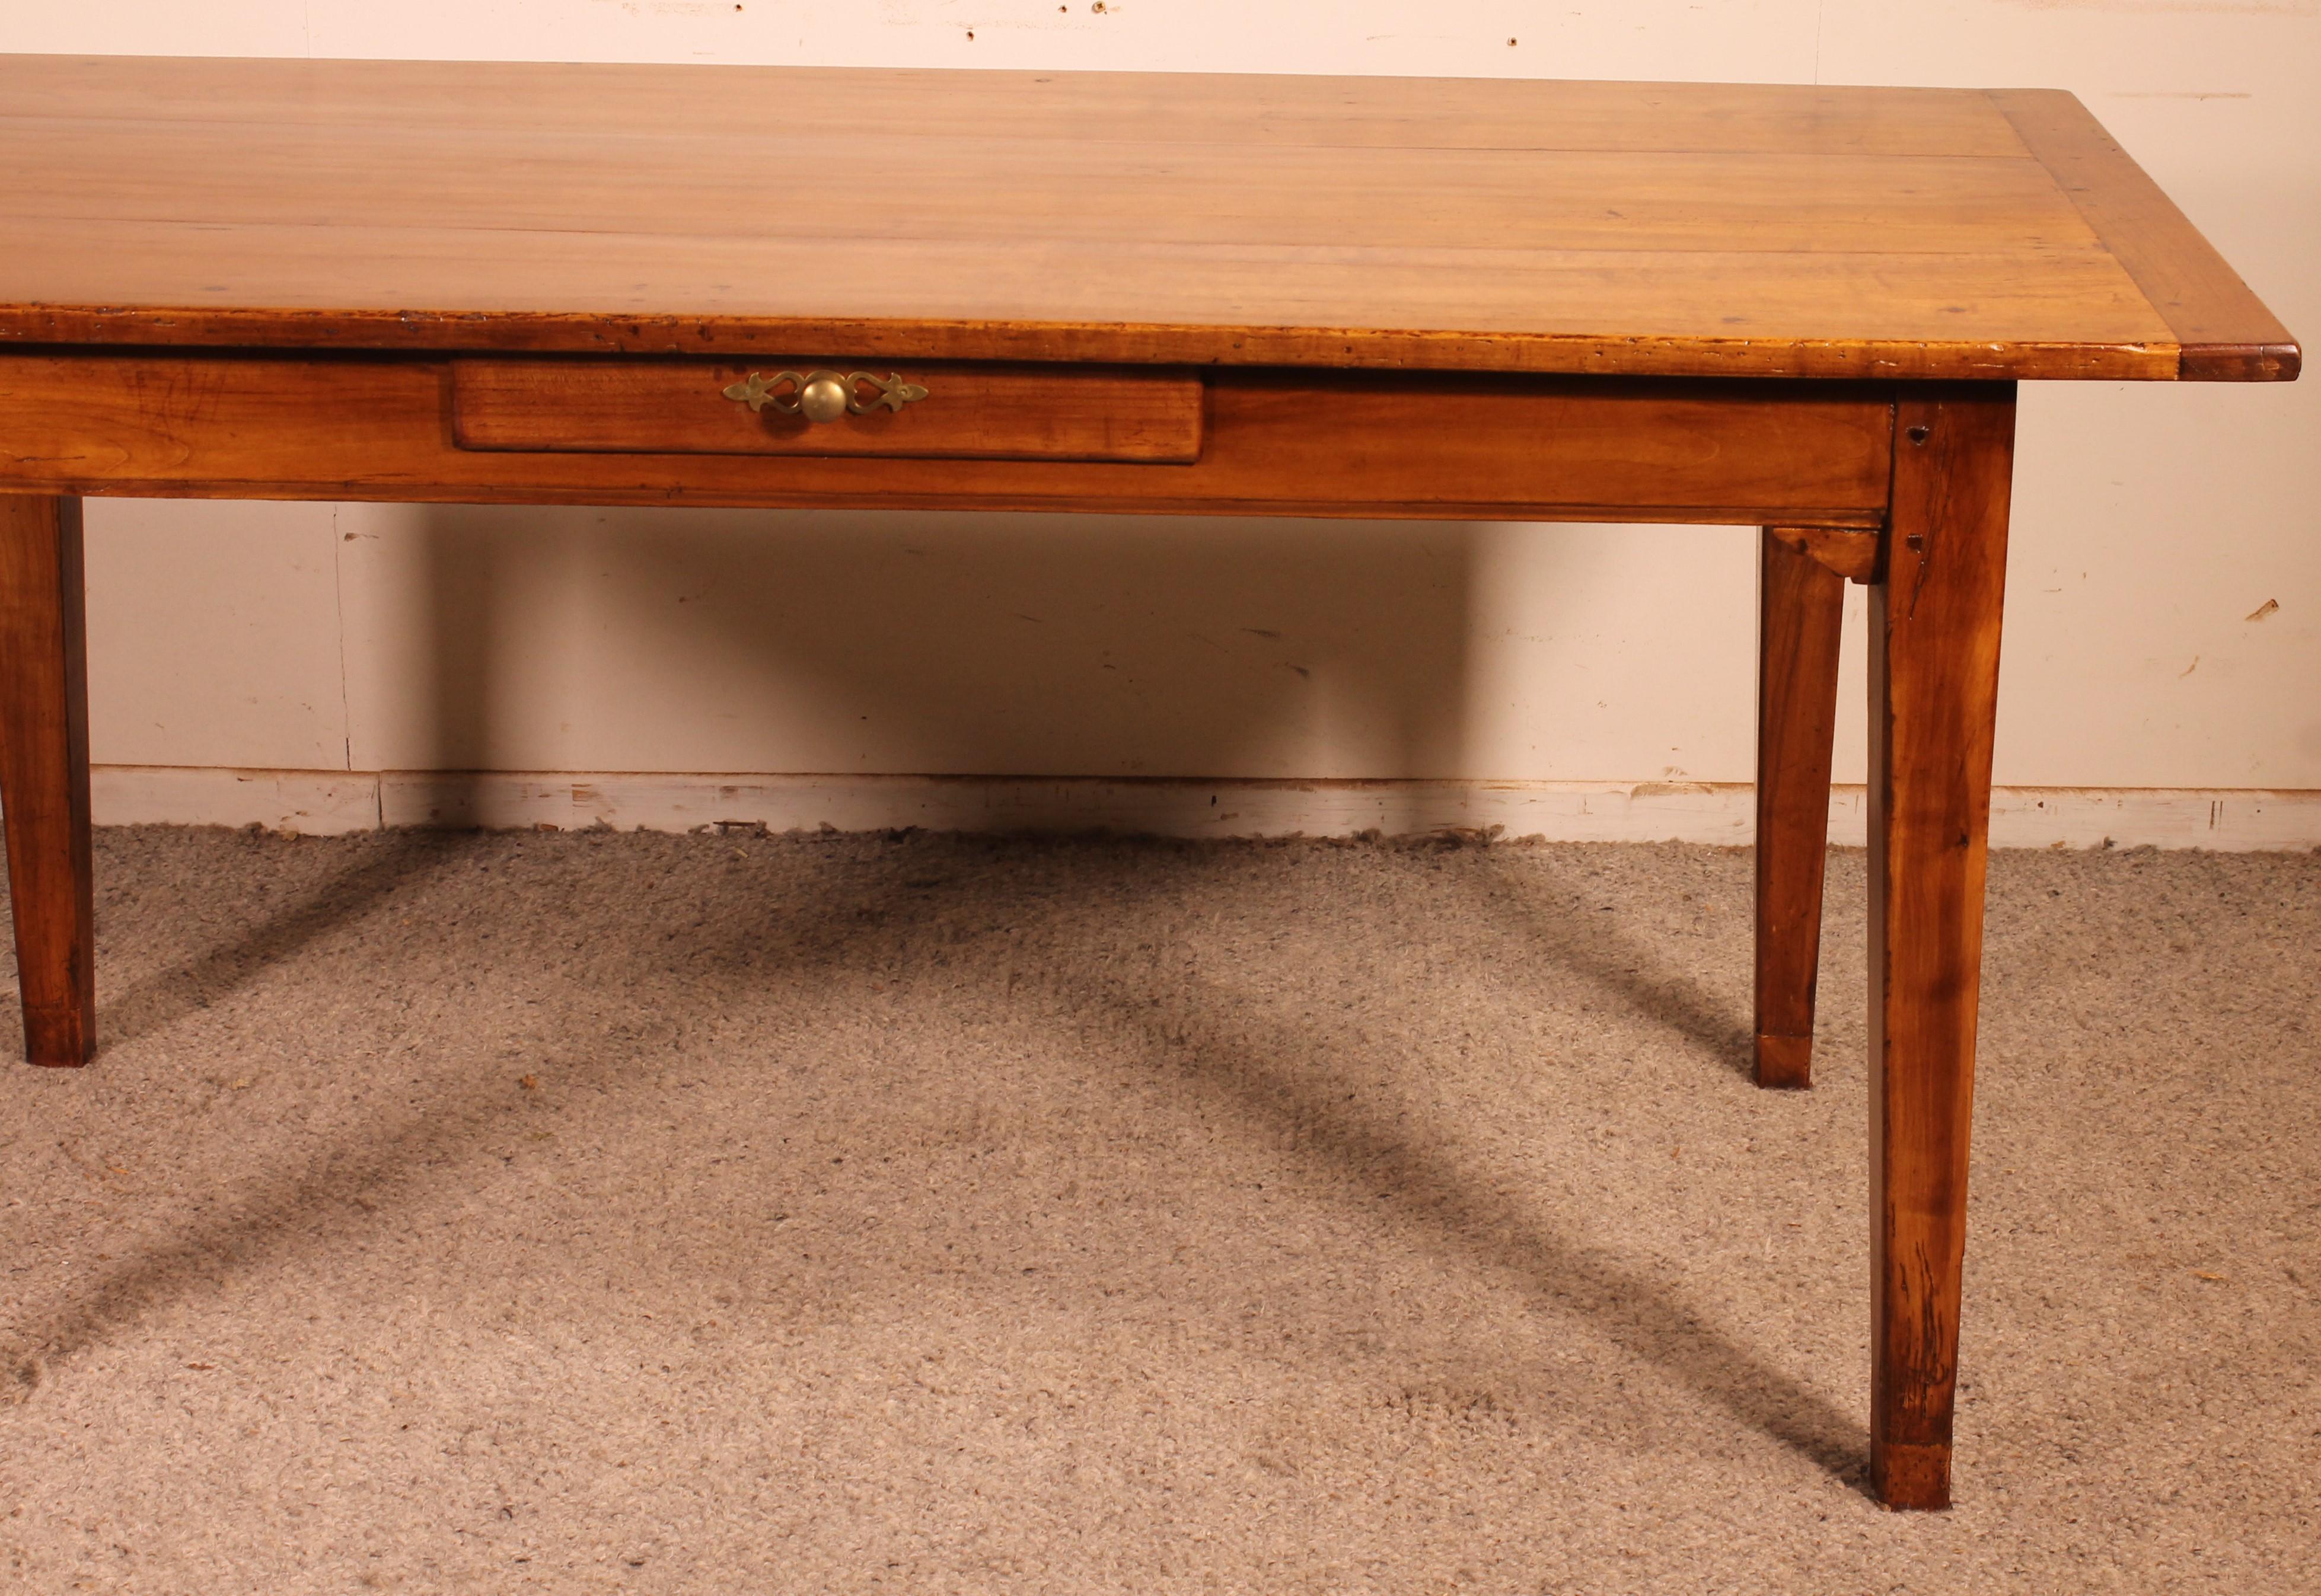 Louis Philippe Small Table in Cherry Wood from the 19th Century For Sale